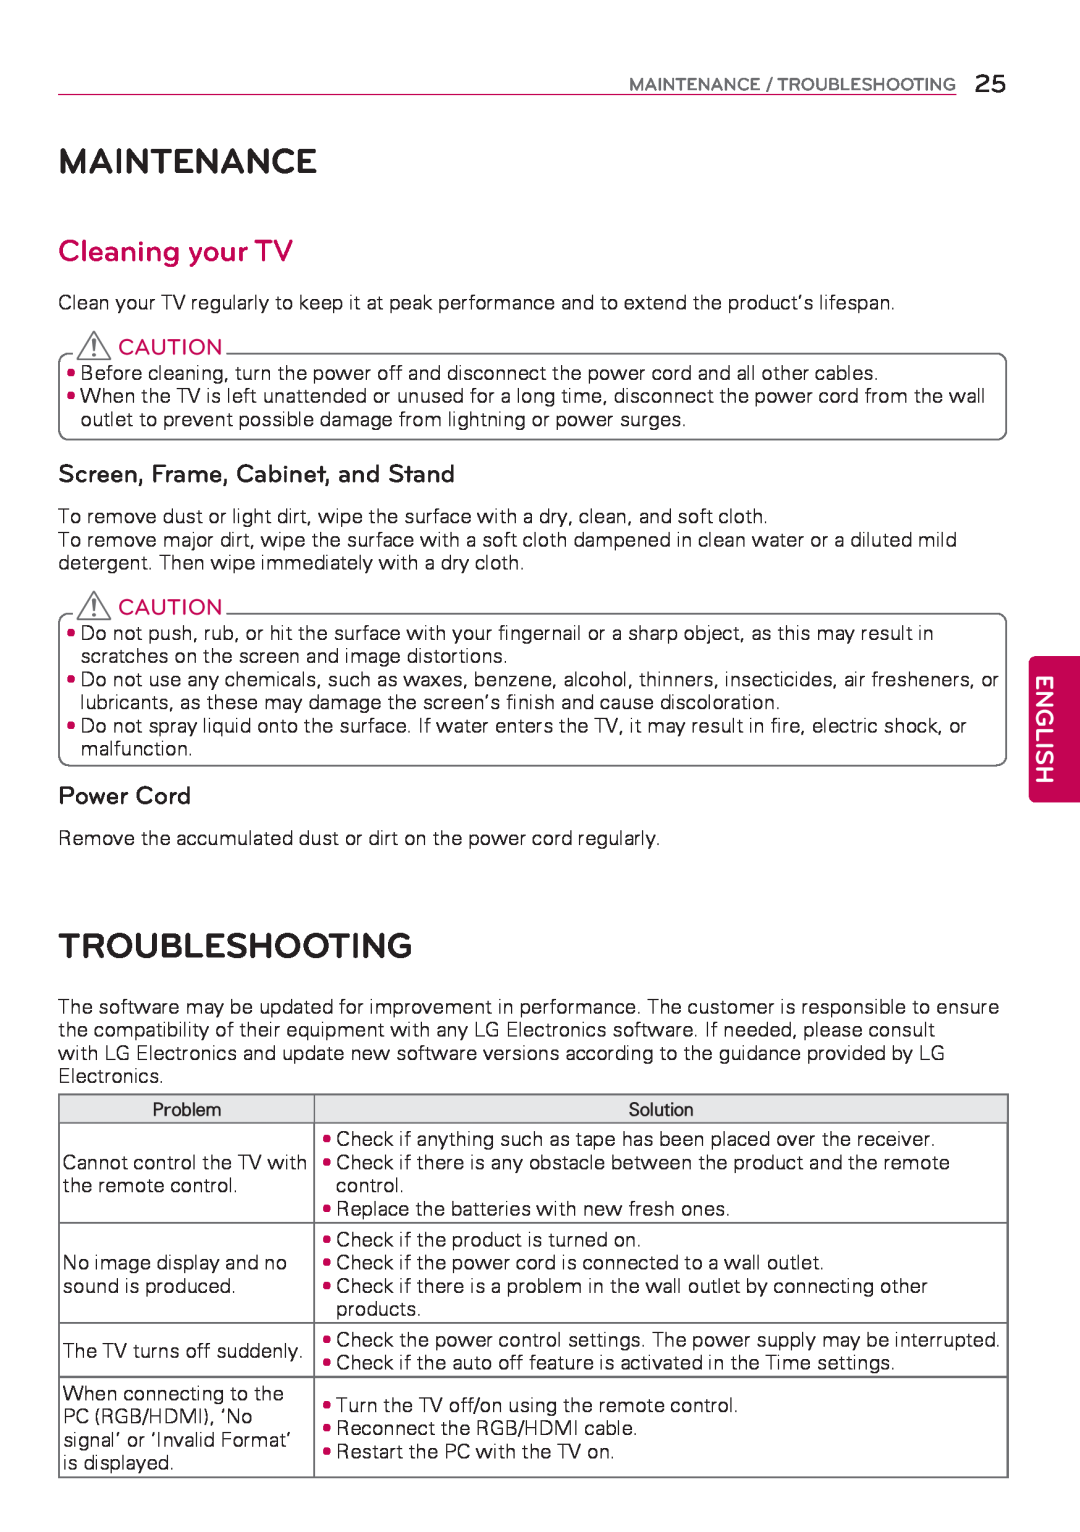 LG Electronics 32LY760H Maintenance, Troubleshooting, Cleaning your TV, Screen, Frame, Cabinet, and Stand, Power Cord 